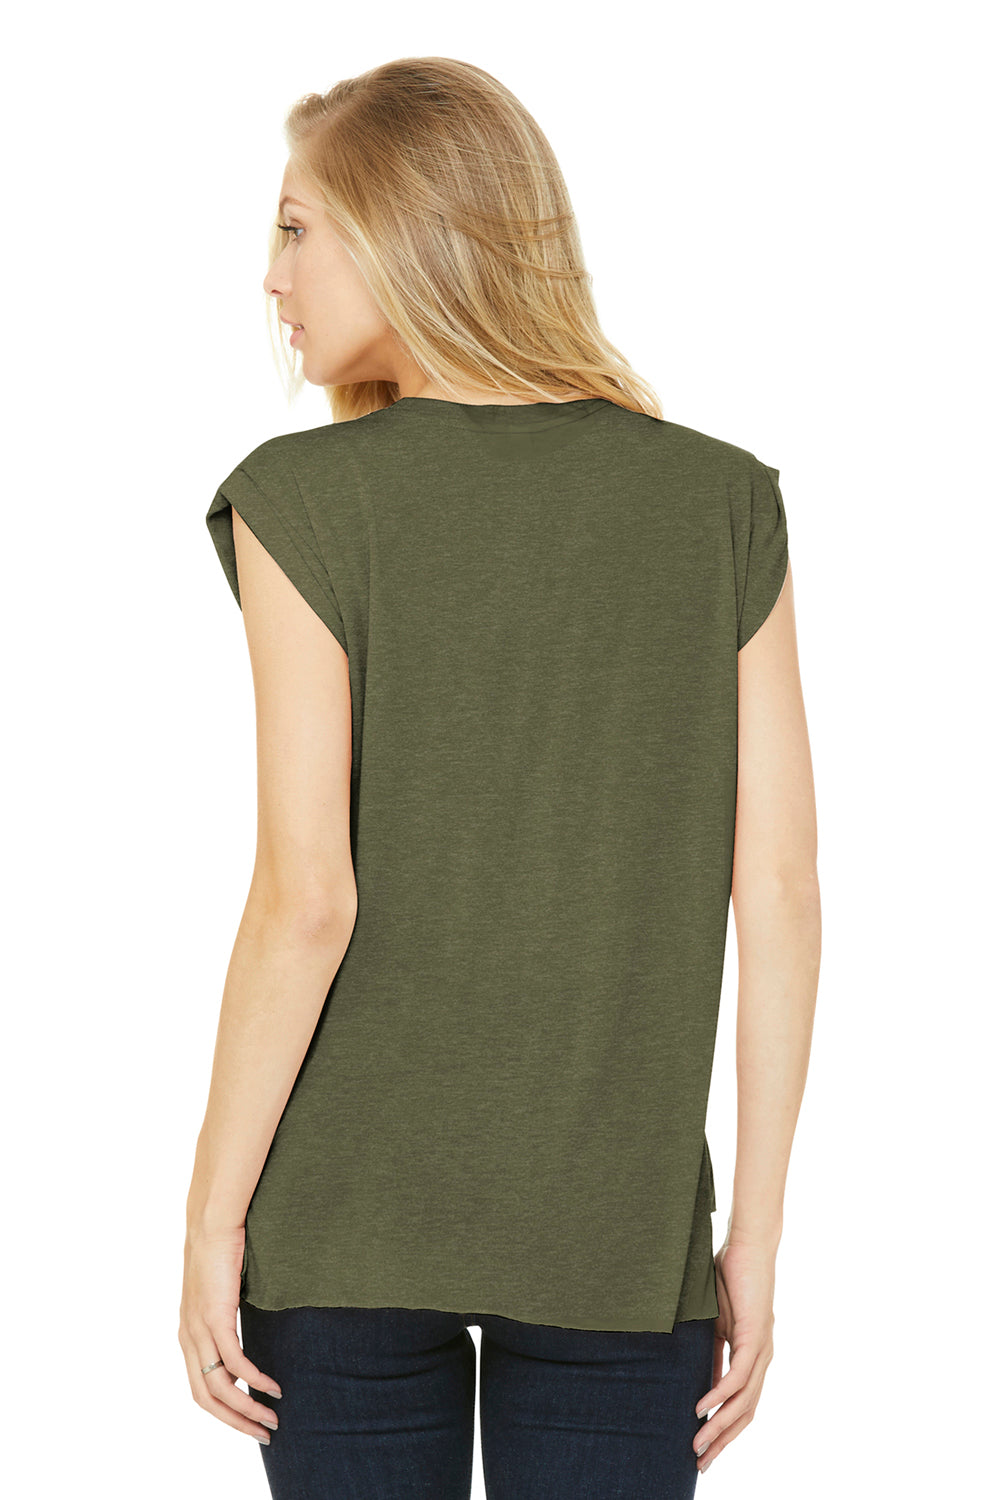 Bella + Canvas 8804 Womens Flowy Muscle Tank Top Heather Olive Green Back